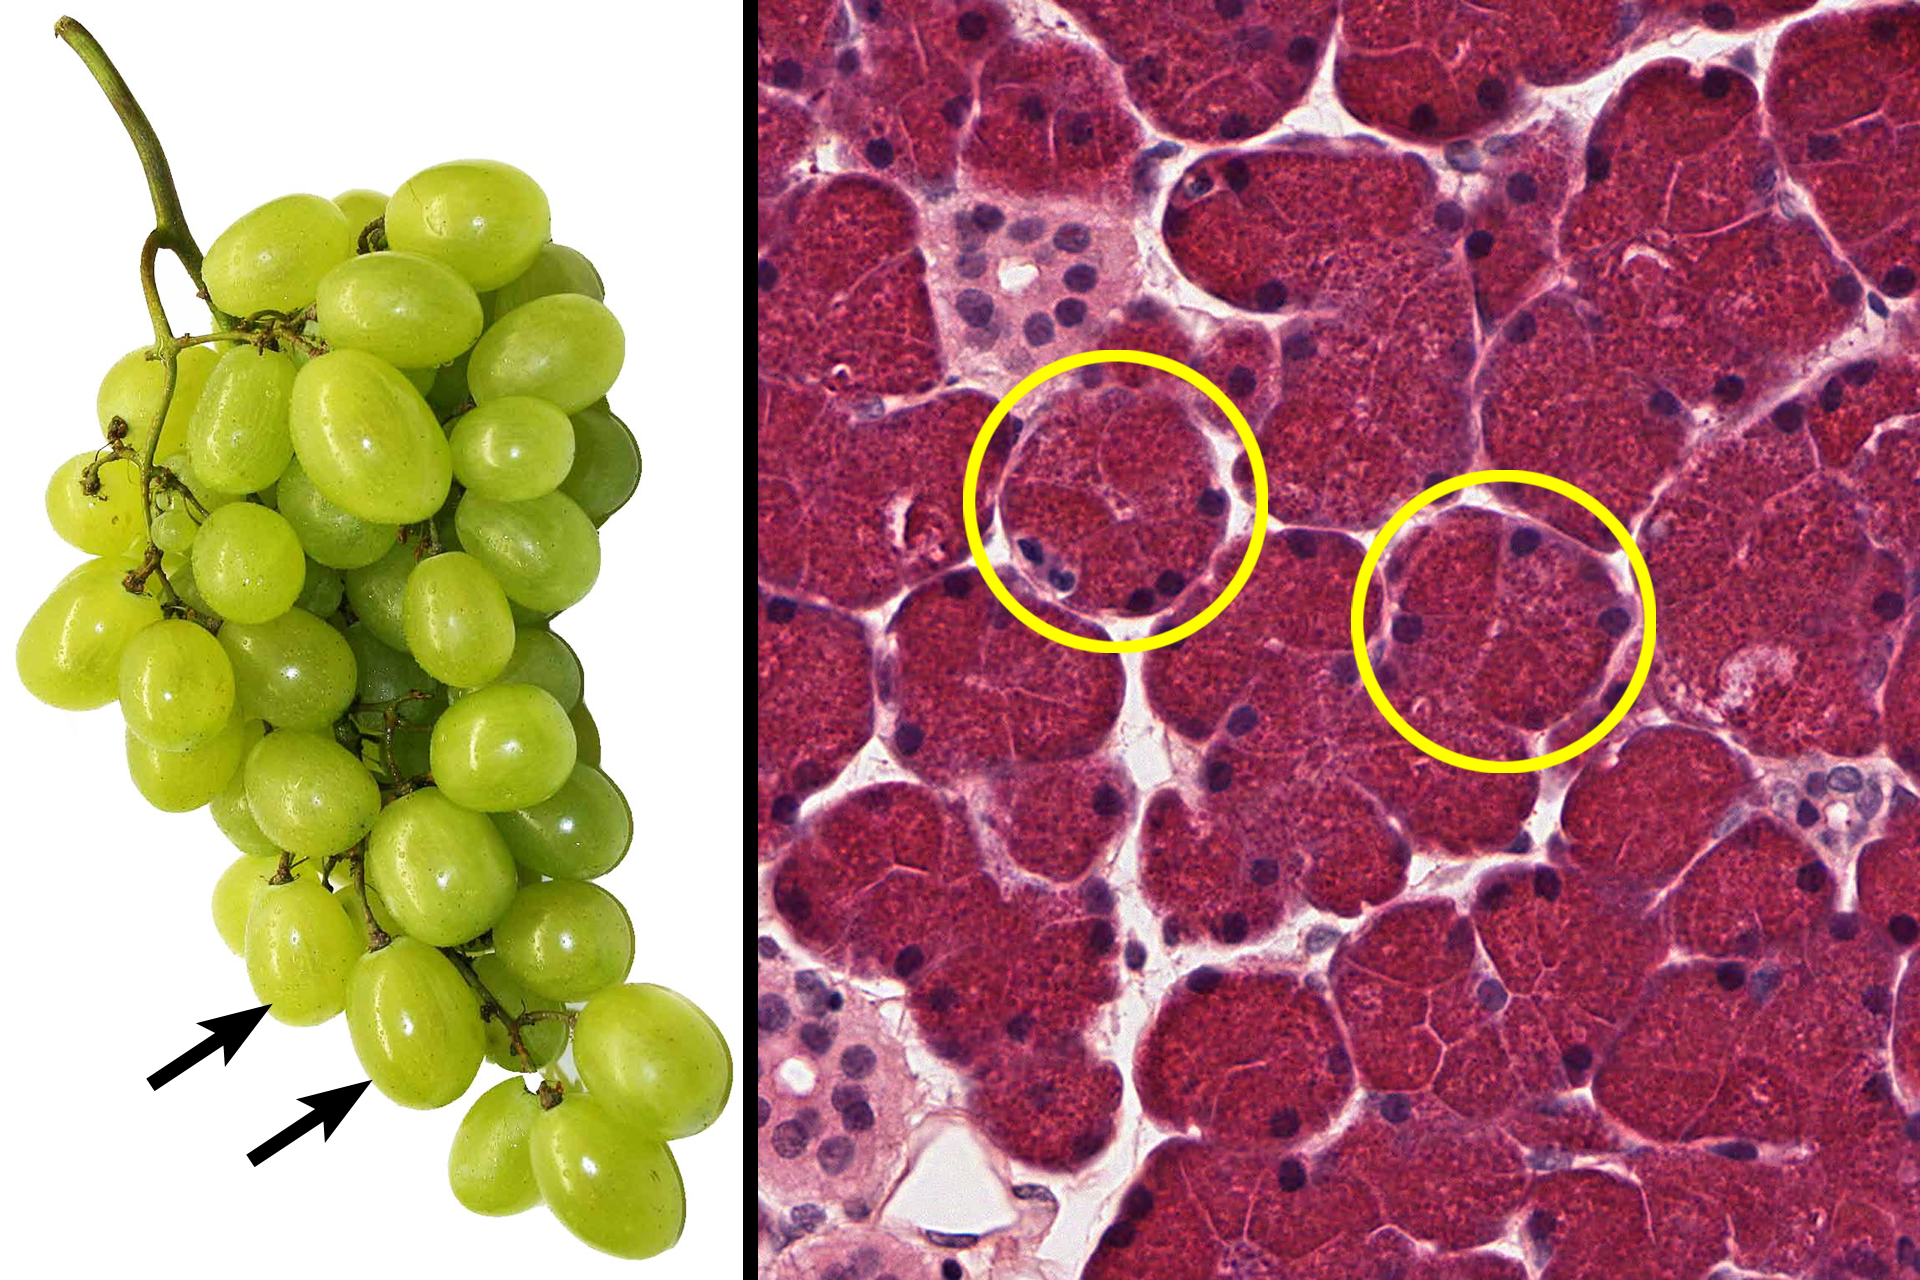  - Acini <p>The structure of a compound acinar gland is analogous to the organization of a bunch of grapes.  Each bunch represents a lobule with individual grapes corresponding to acini.  Smaller stems connecting to the grapes denote intralobular ducts with the larger stems representing the interlobular duct.  It’s helpful to keep this similarity in mind when interpreting tissue sections of compound glands.</p>
